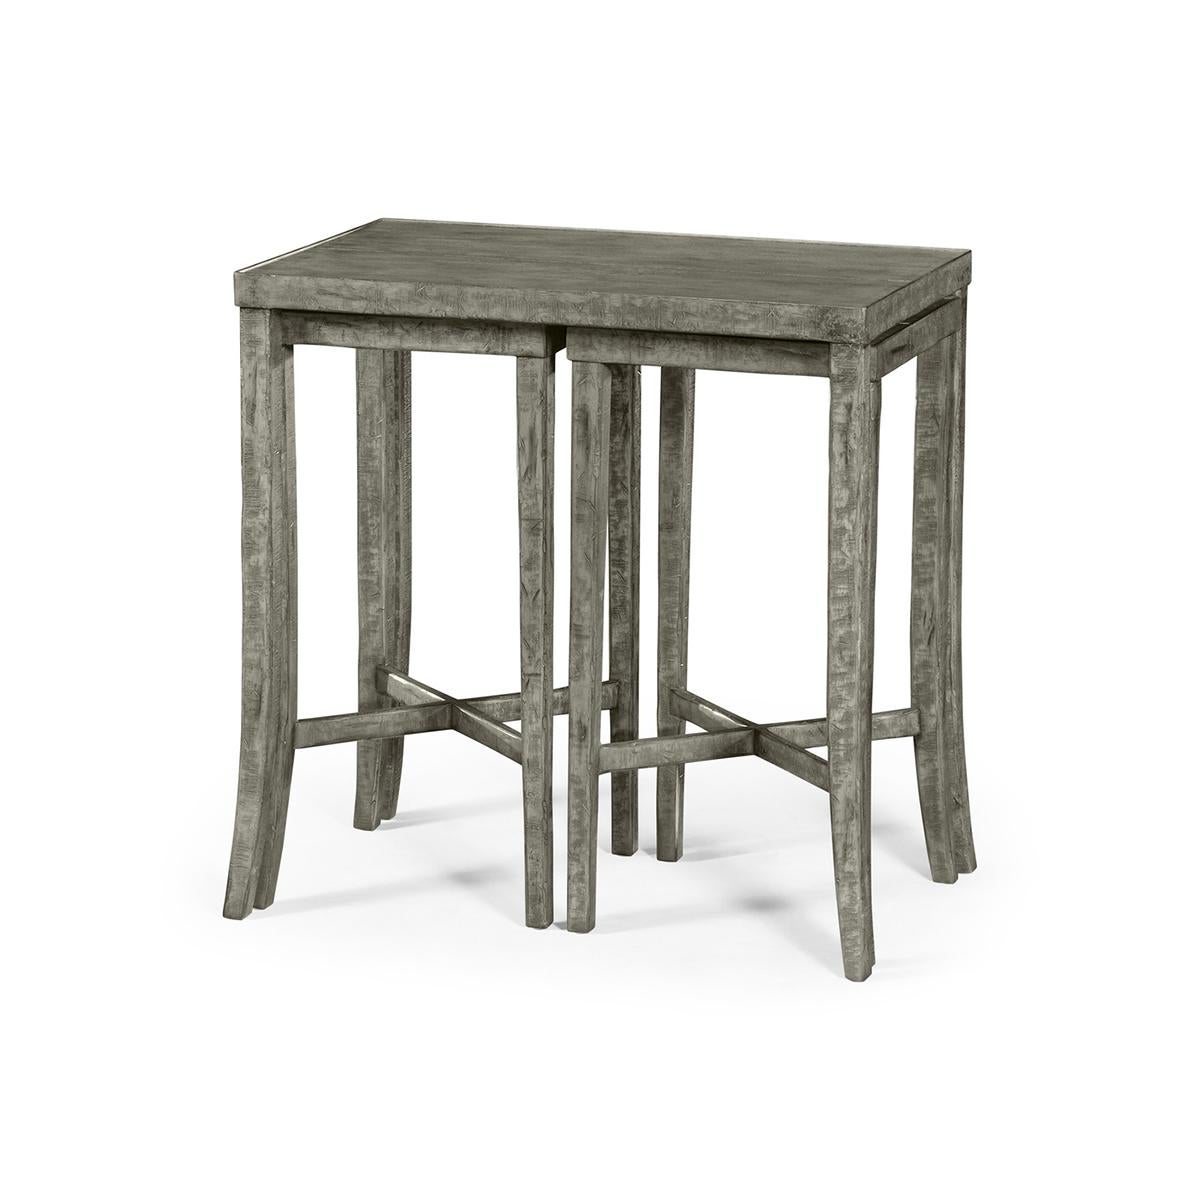 Rustic country nesting tables, these antique dark grey nesting cocktail tables feature two smaller tables that fit under the main cocktail table.

Dimensions: 28